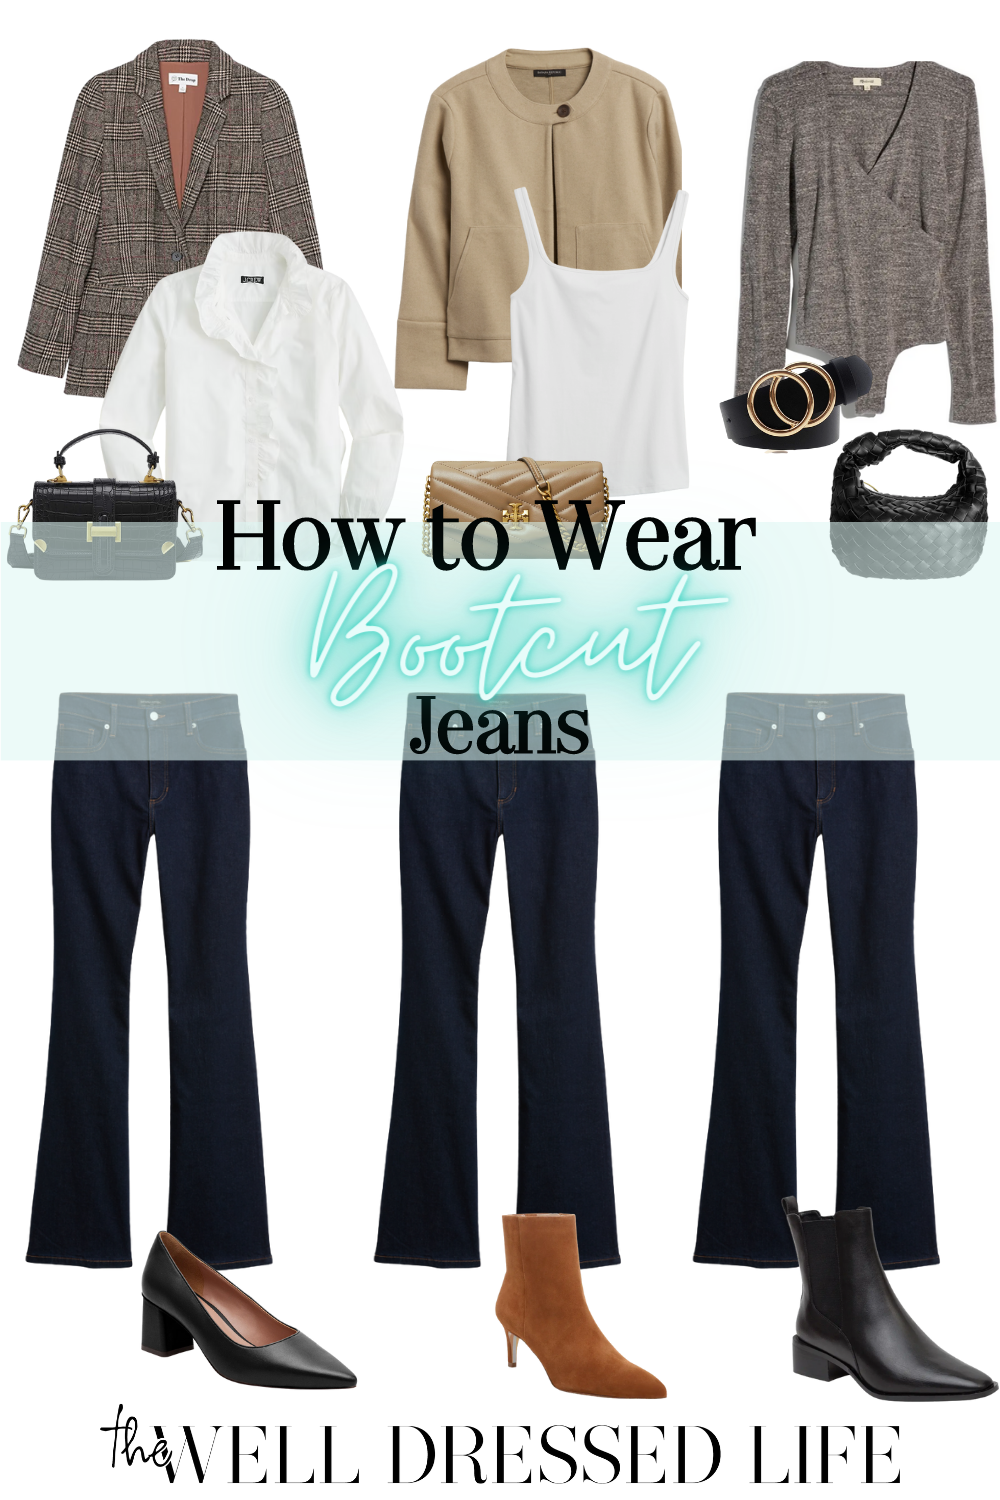 How To Wear Black Bootcut Jeans 5 Tips To Look Effortlessly Chic 4732